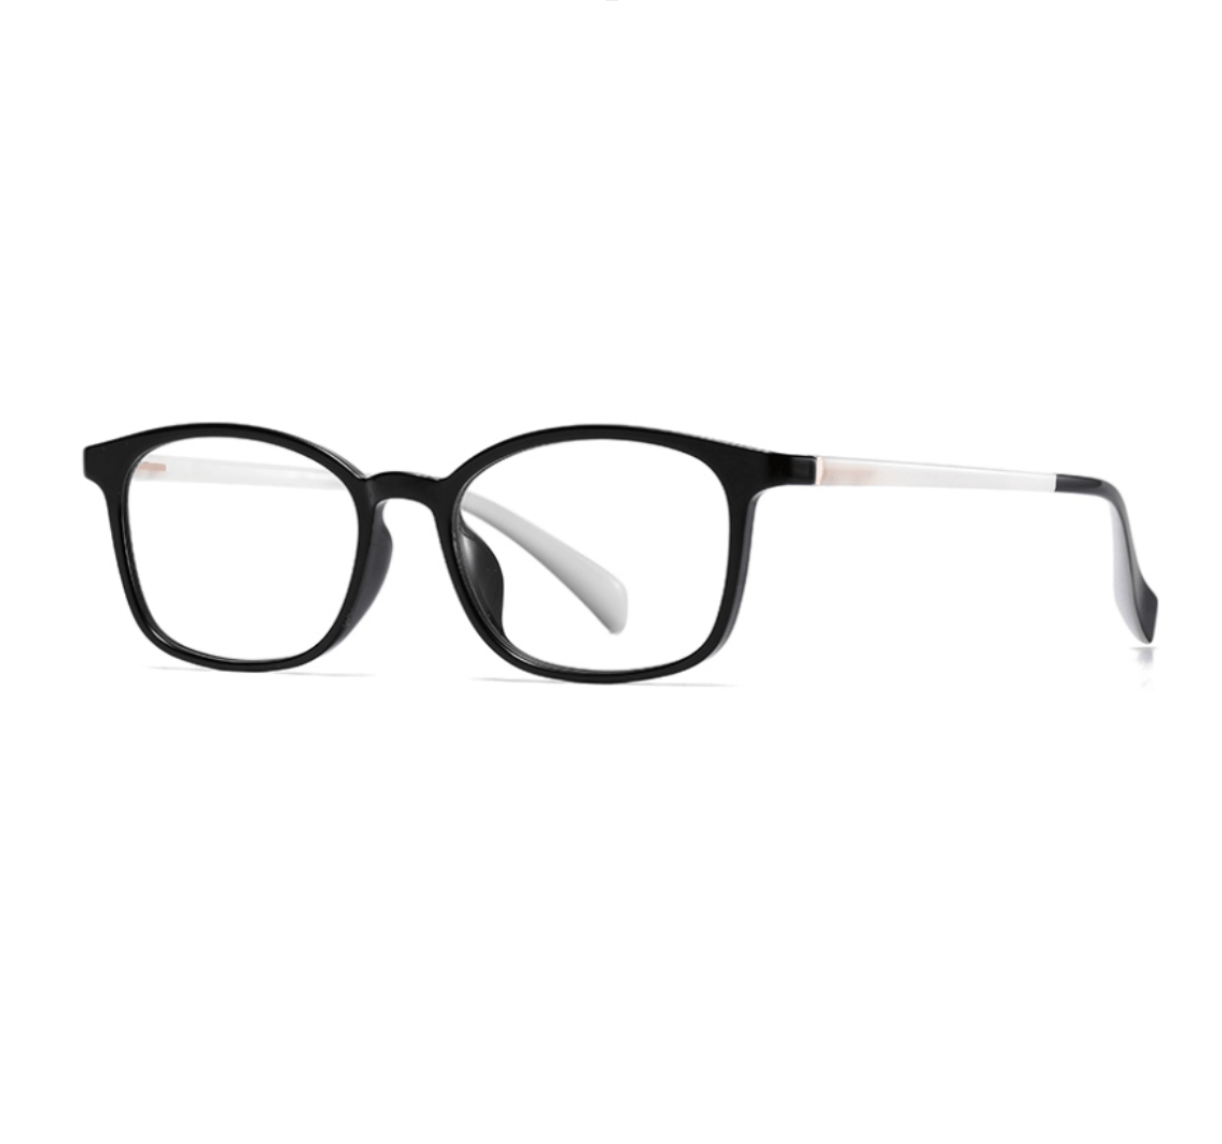 TR90 teenage glasses frames, spectacle frames wholesale suppliers